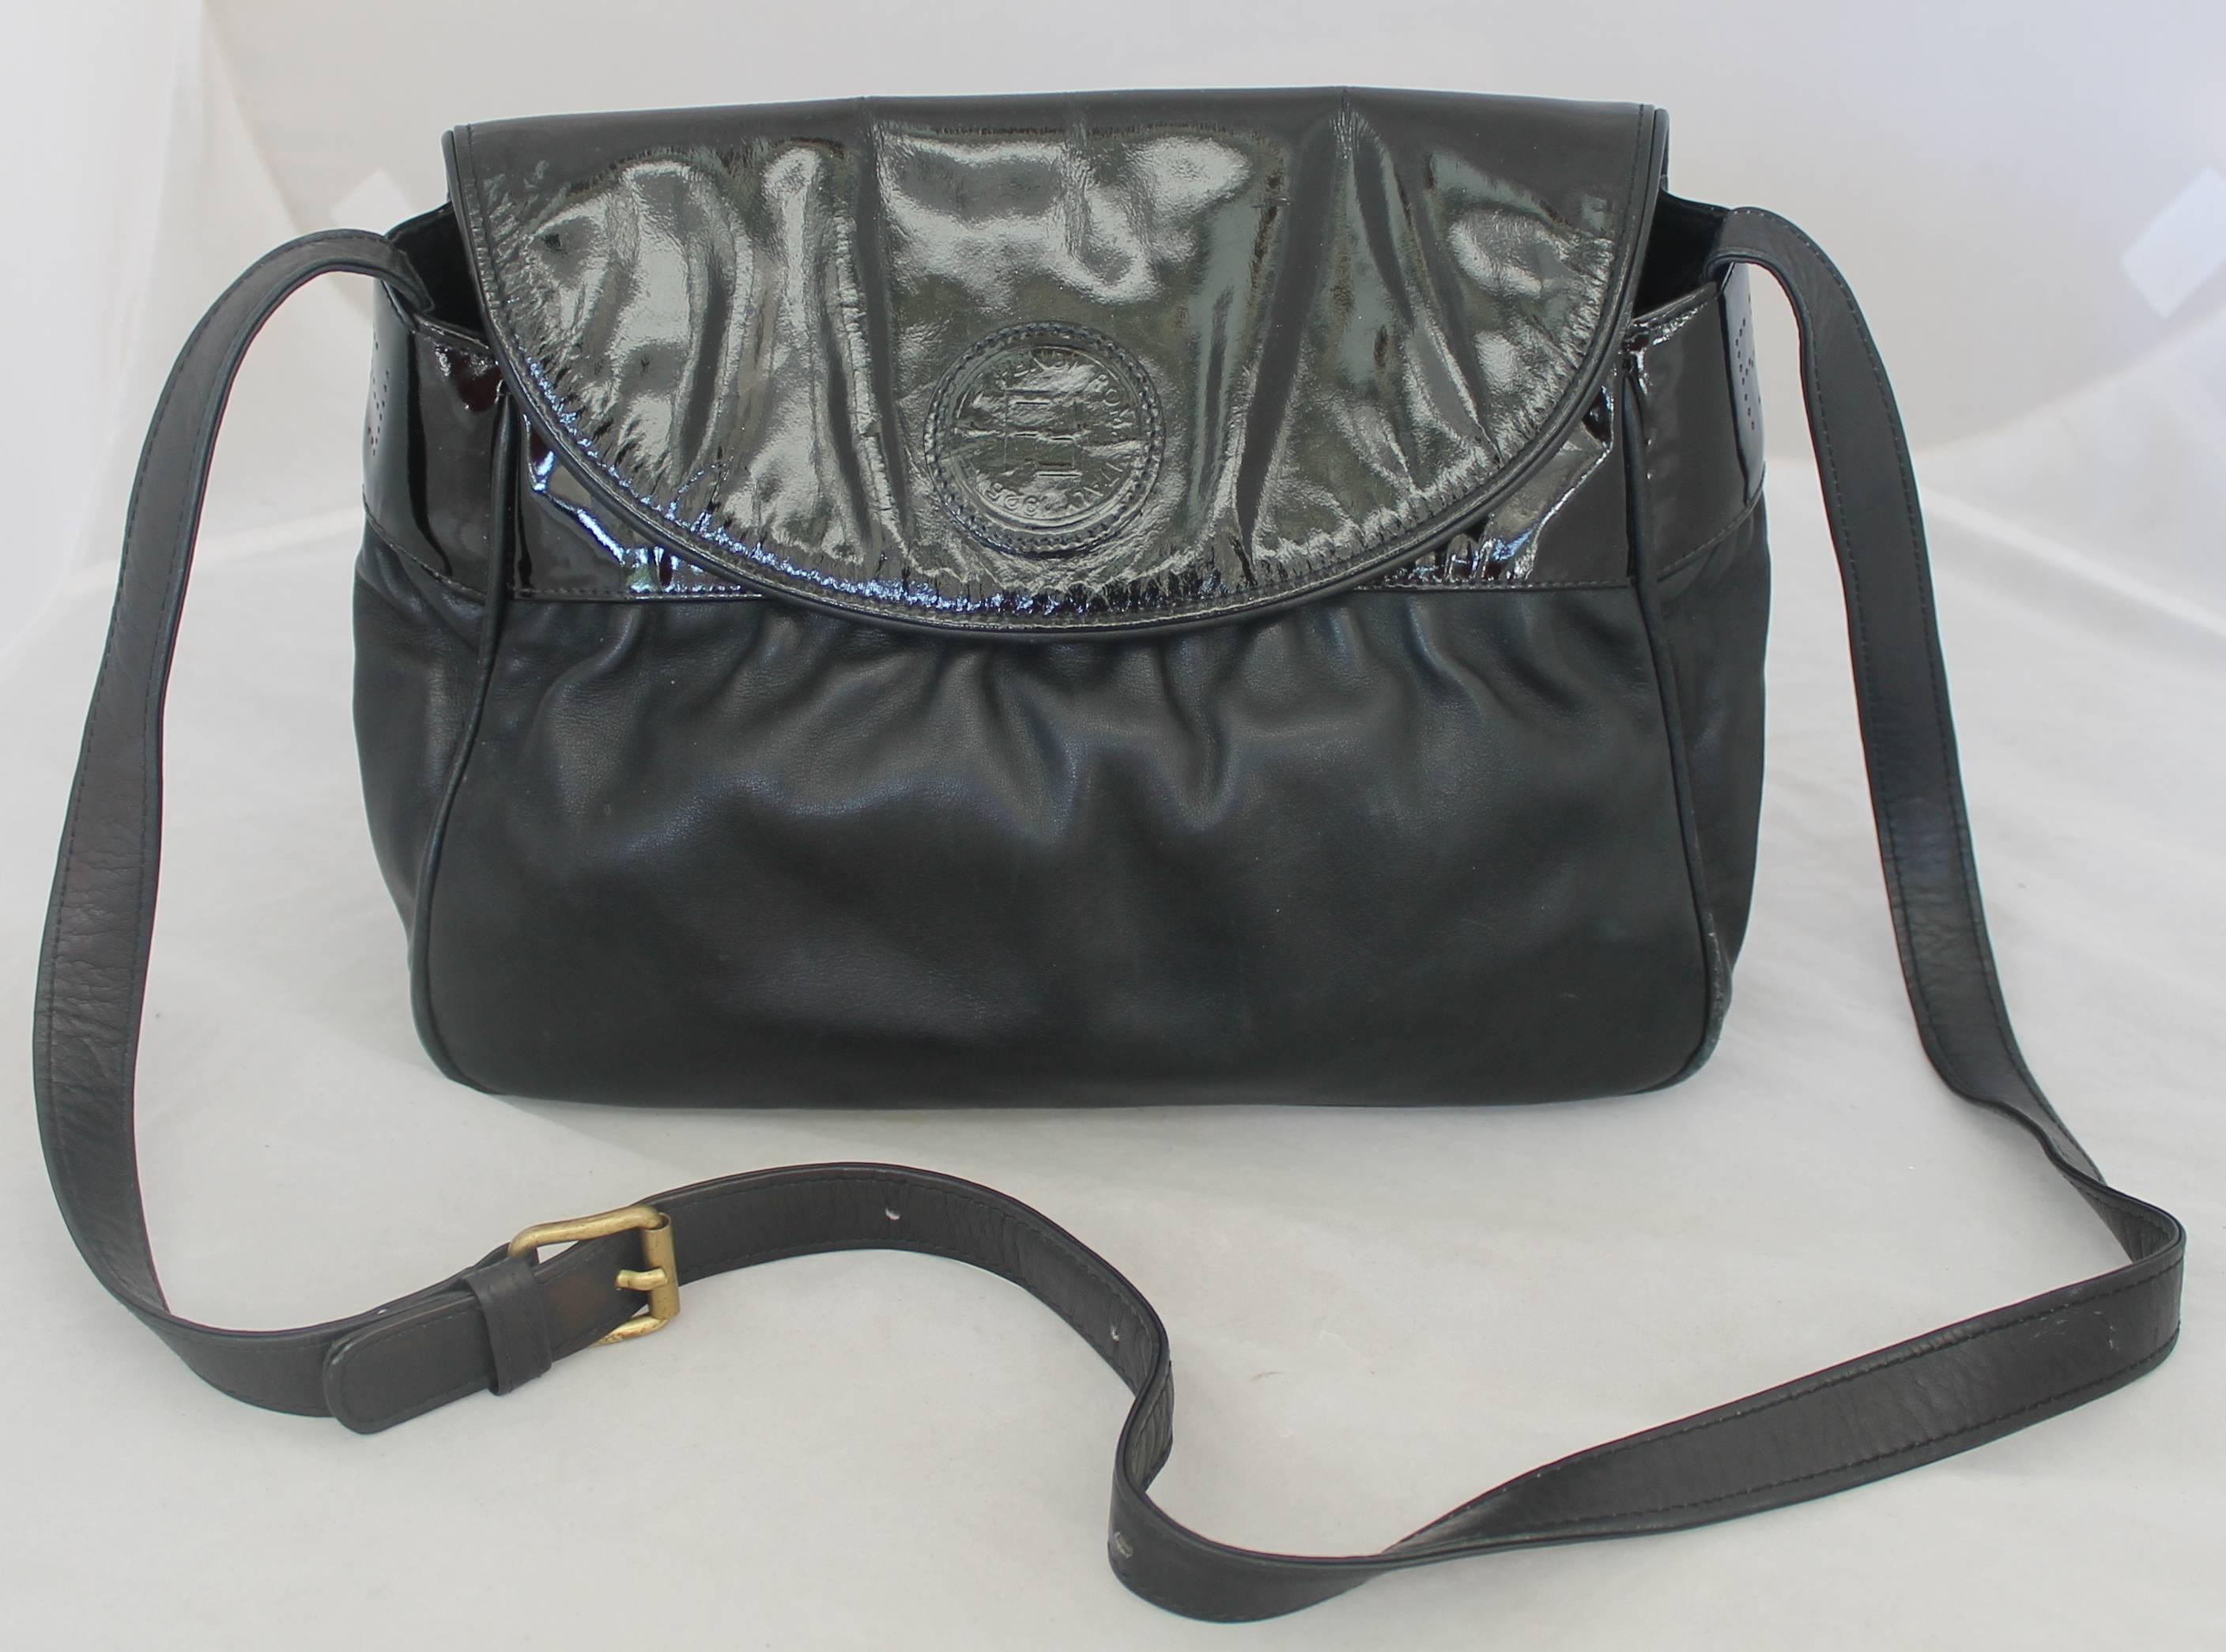 Fendi Vintage Black Leather & Patent Crossbody - Circa 1990's.  This lovely Fendi bag is in good vintage condition with only some wear consistent with its age.  It features black leather and black patent, the Fendi logo on the patent flap, a button